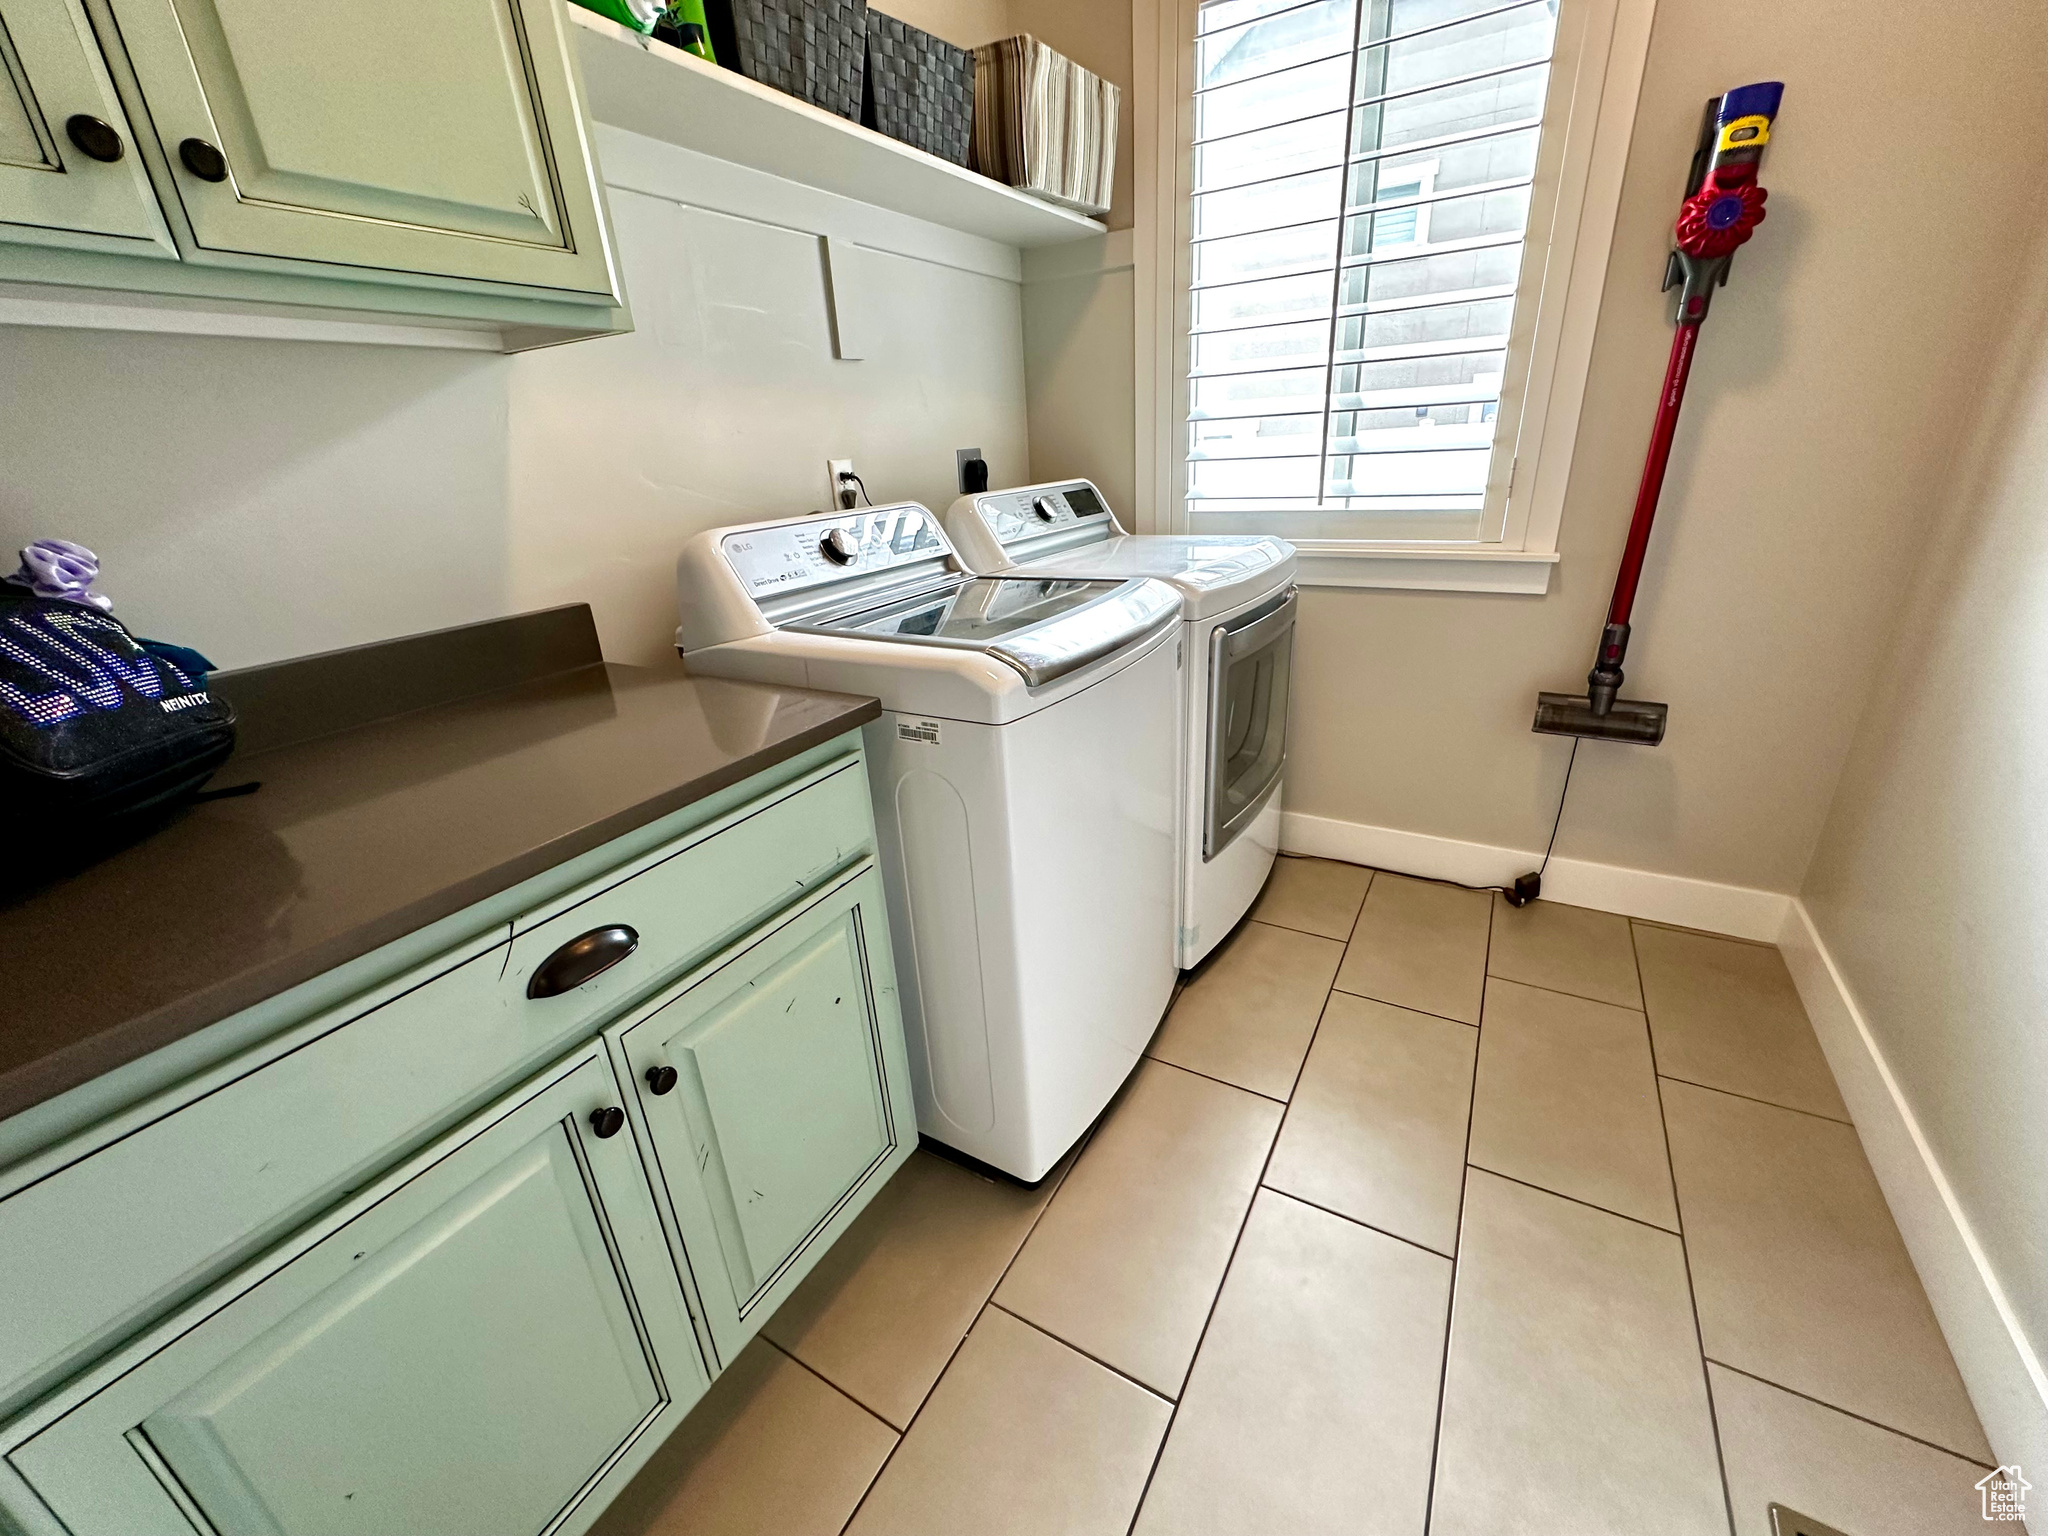 Laundry area with light tile floors, cabinets, hookup for an electric dryer, and independent washer and dryer